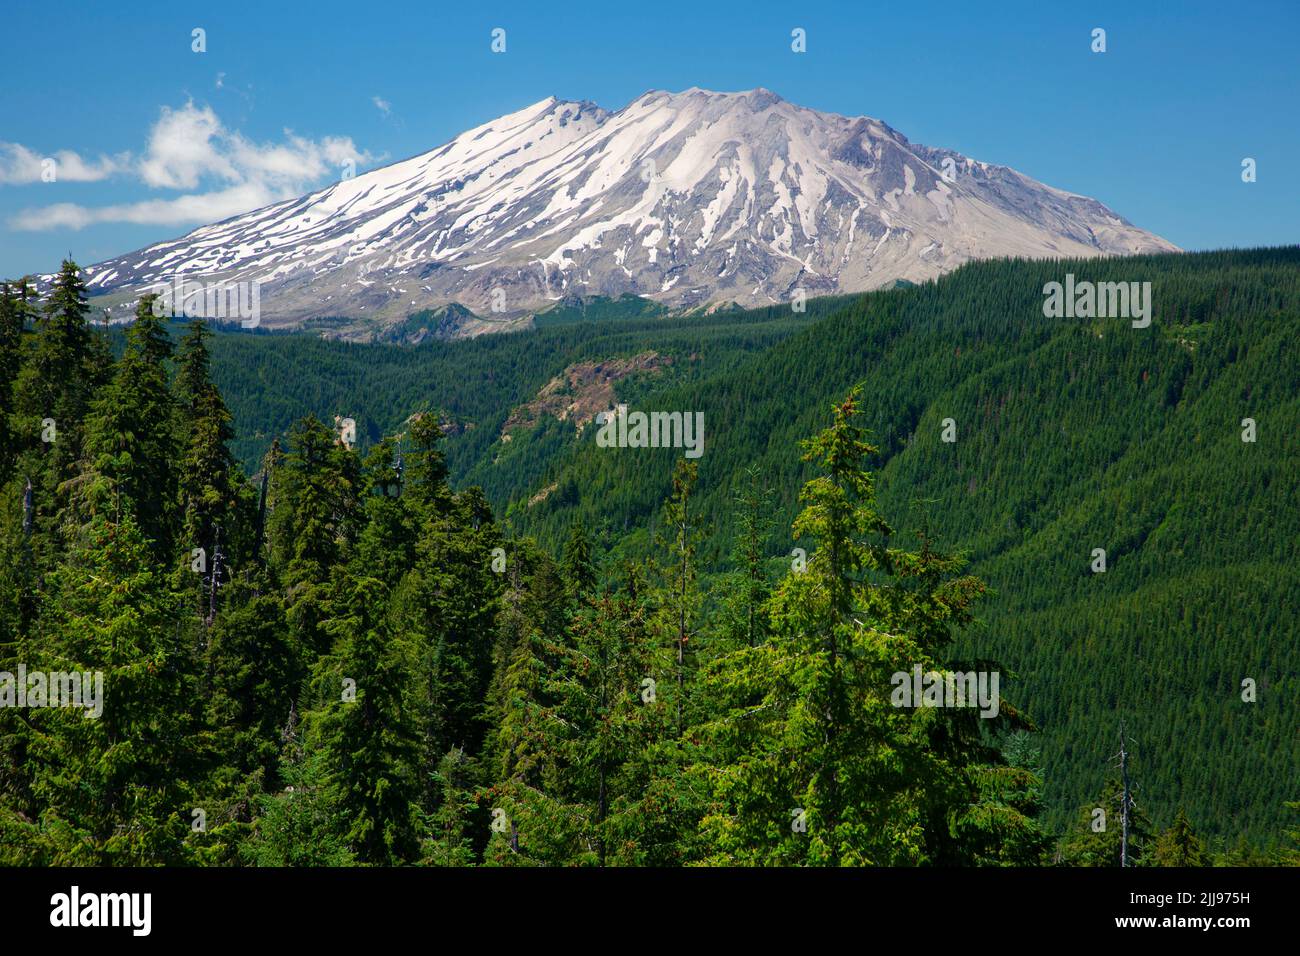 Mt St Helens da Clearwater Viewpoint, Gifford Pinchot National Forest, Washington Foto Stock